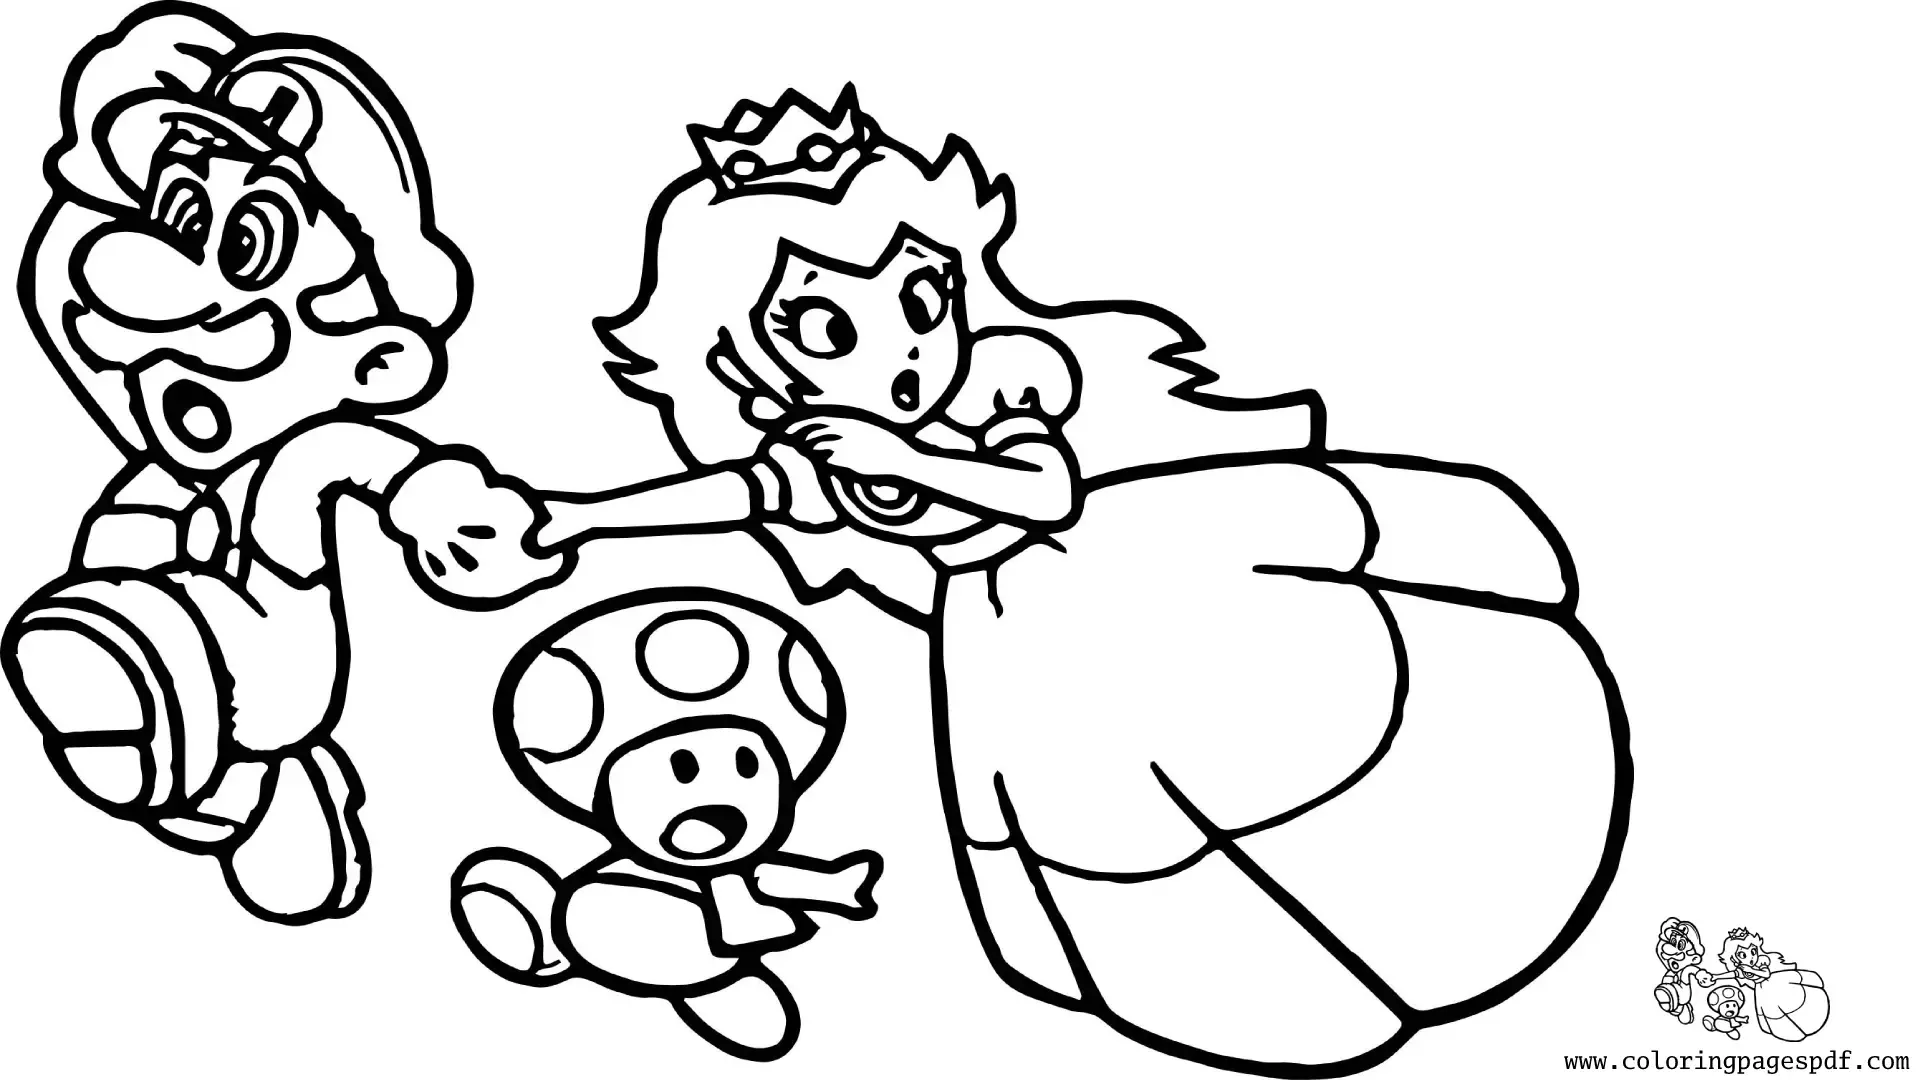 Coloring Page Of Mario, Toad, And Peach Running